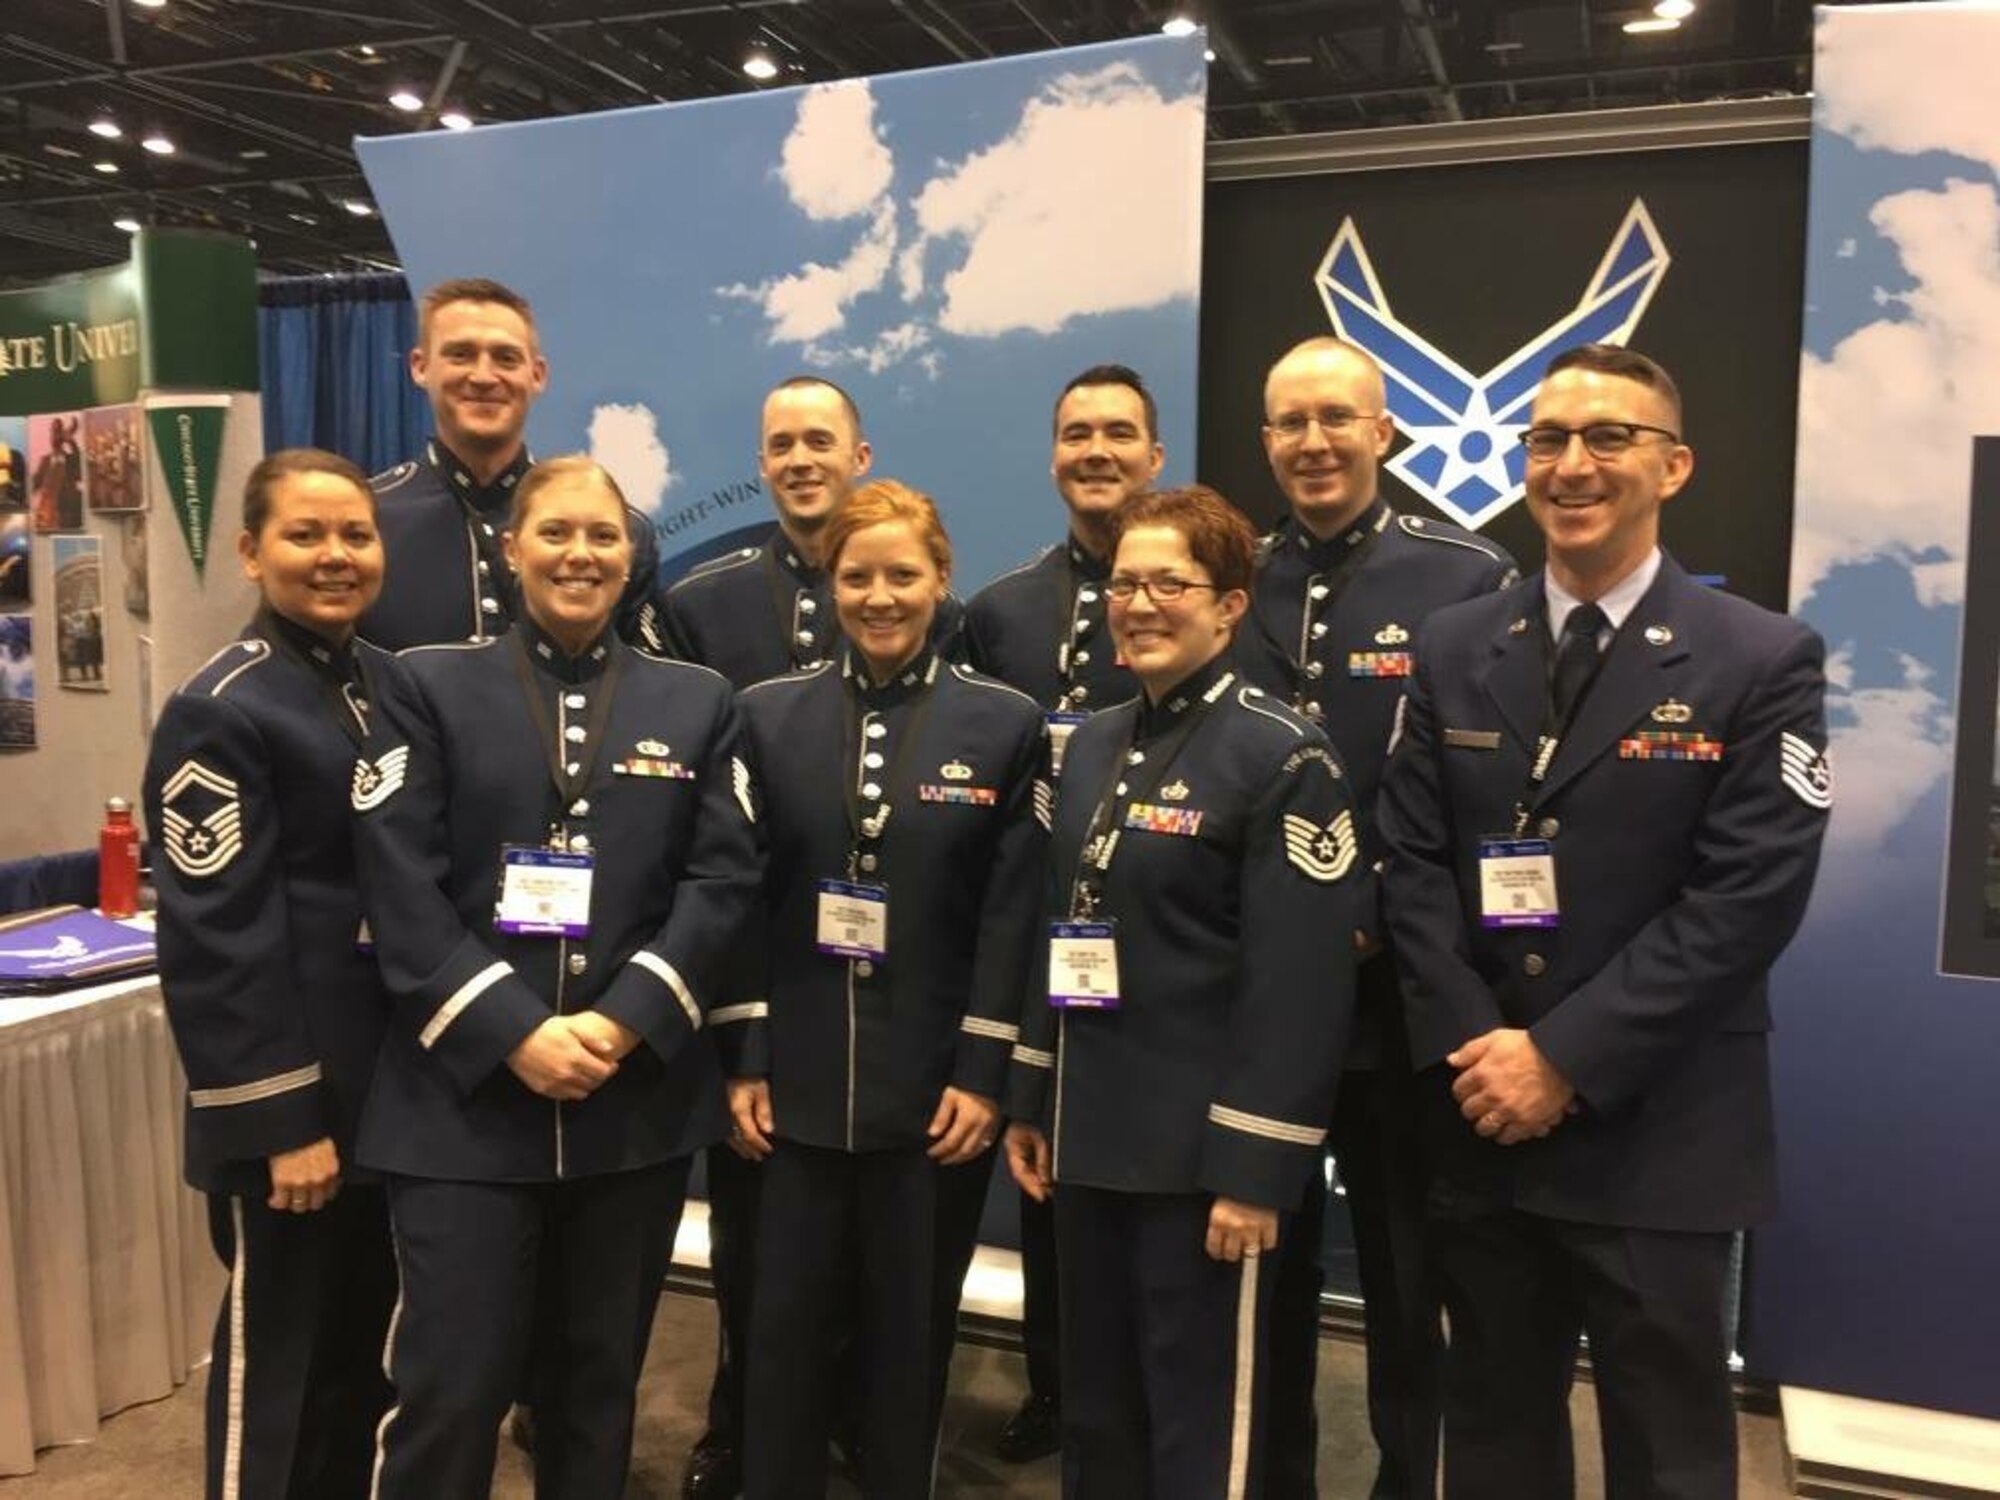 Members of the USAF Band attend the Midwest Band and Orchestra Clinic in Chicago, IL